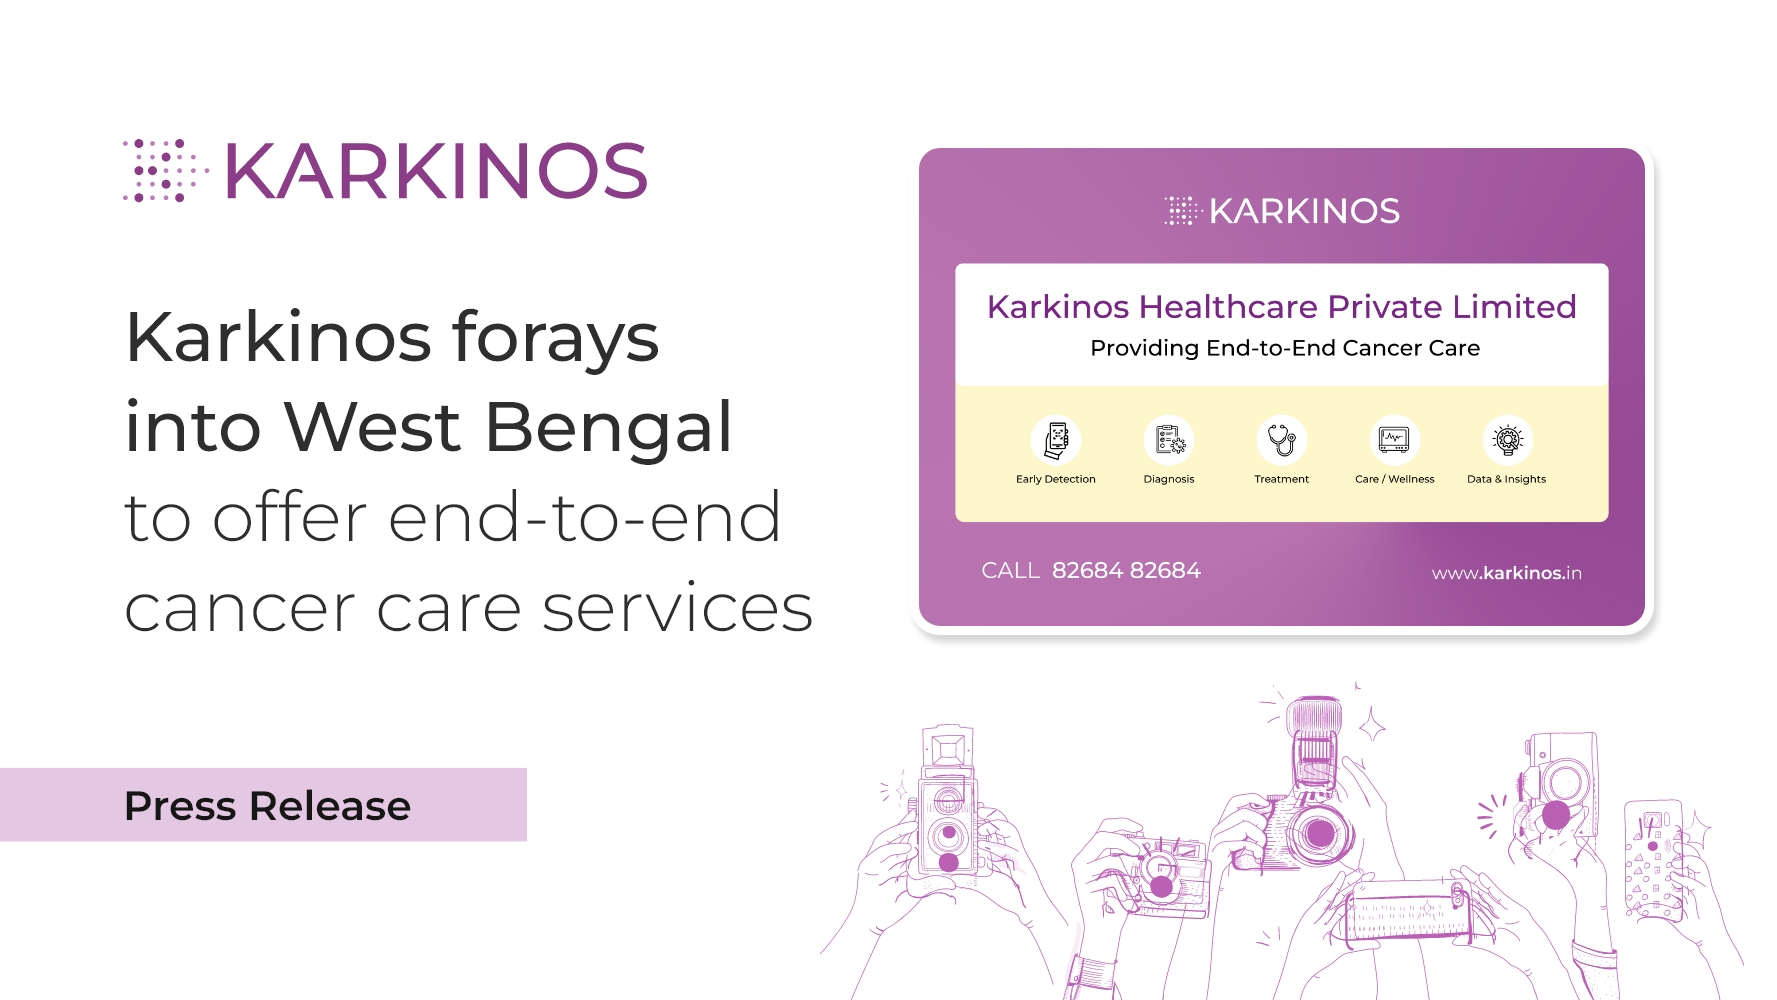 Karkinos Healthcare forays into West Bengal to enable better access to cancer care